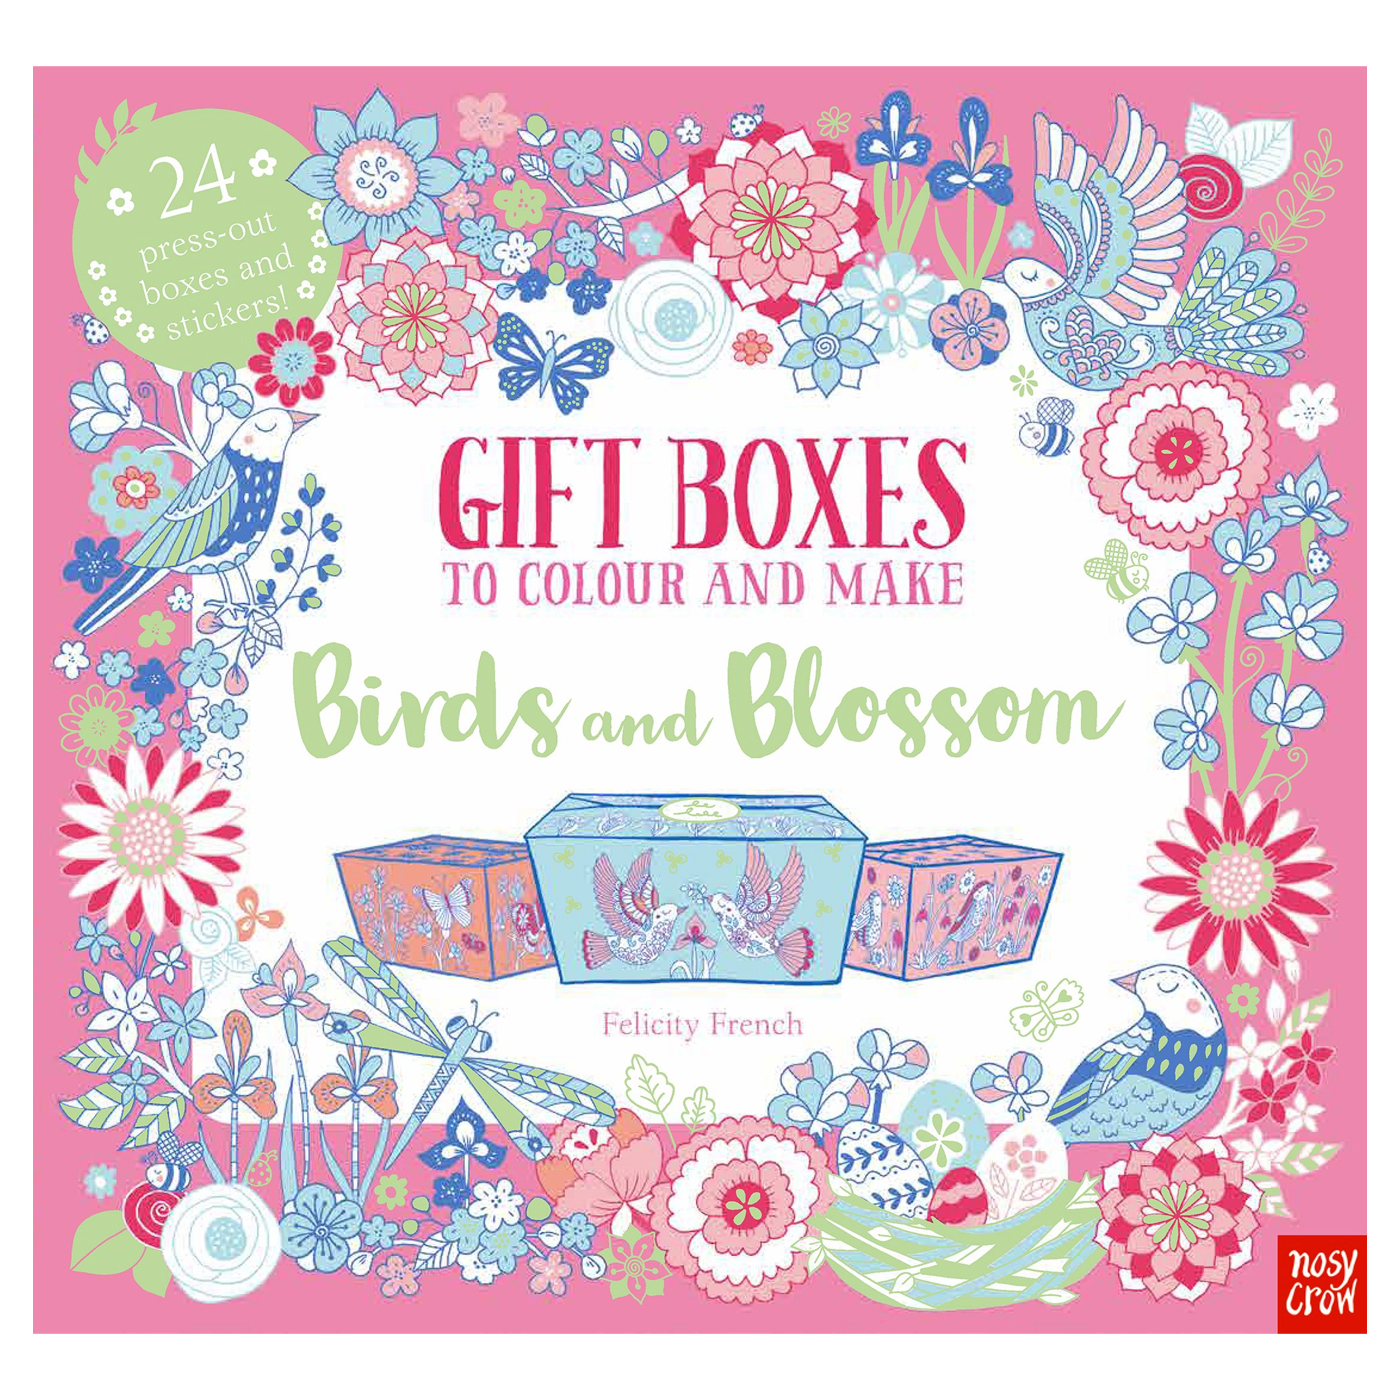  Gift Boxes to Colour And Make: Birds and Blossom